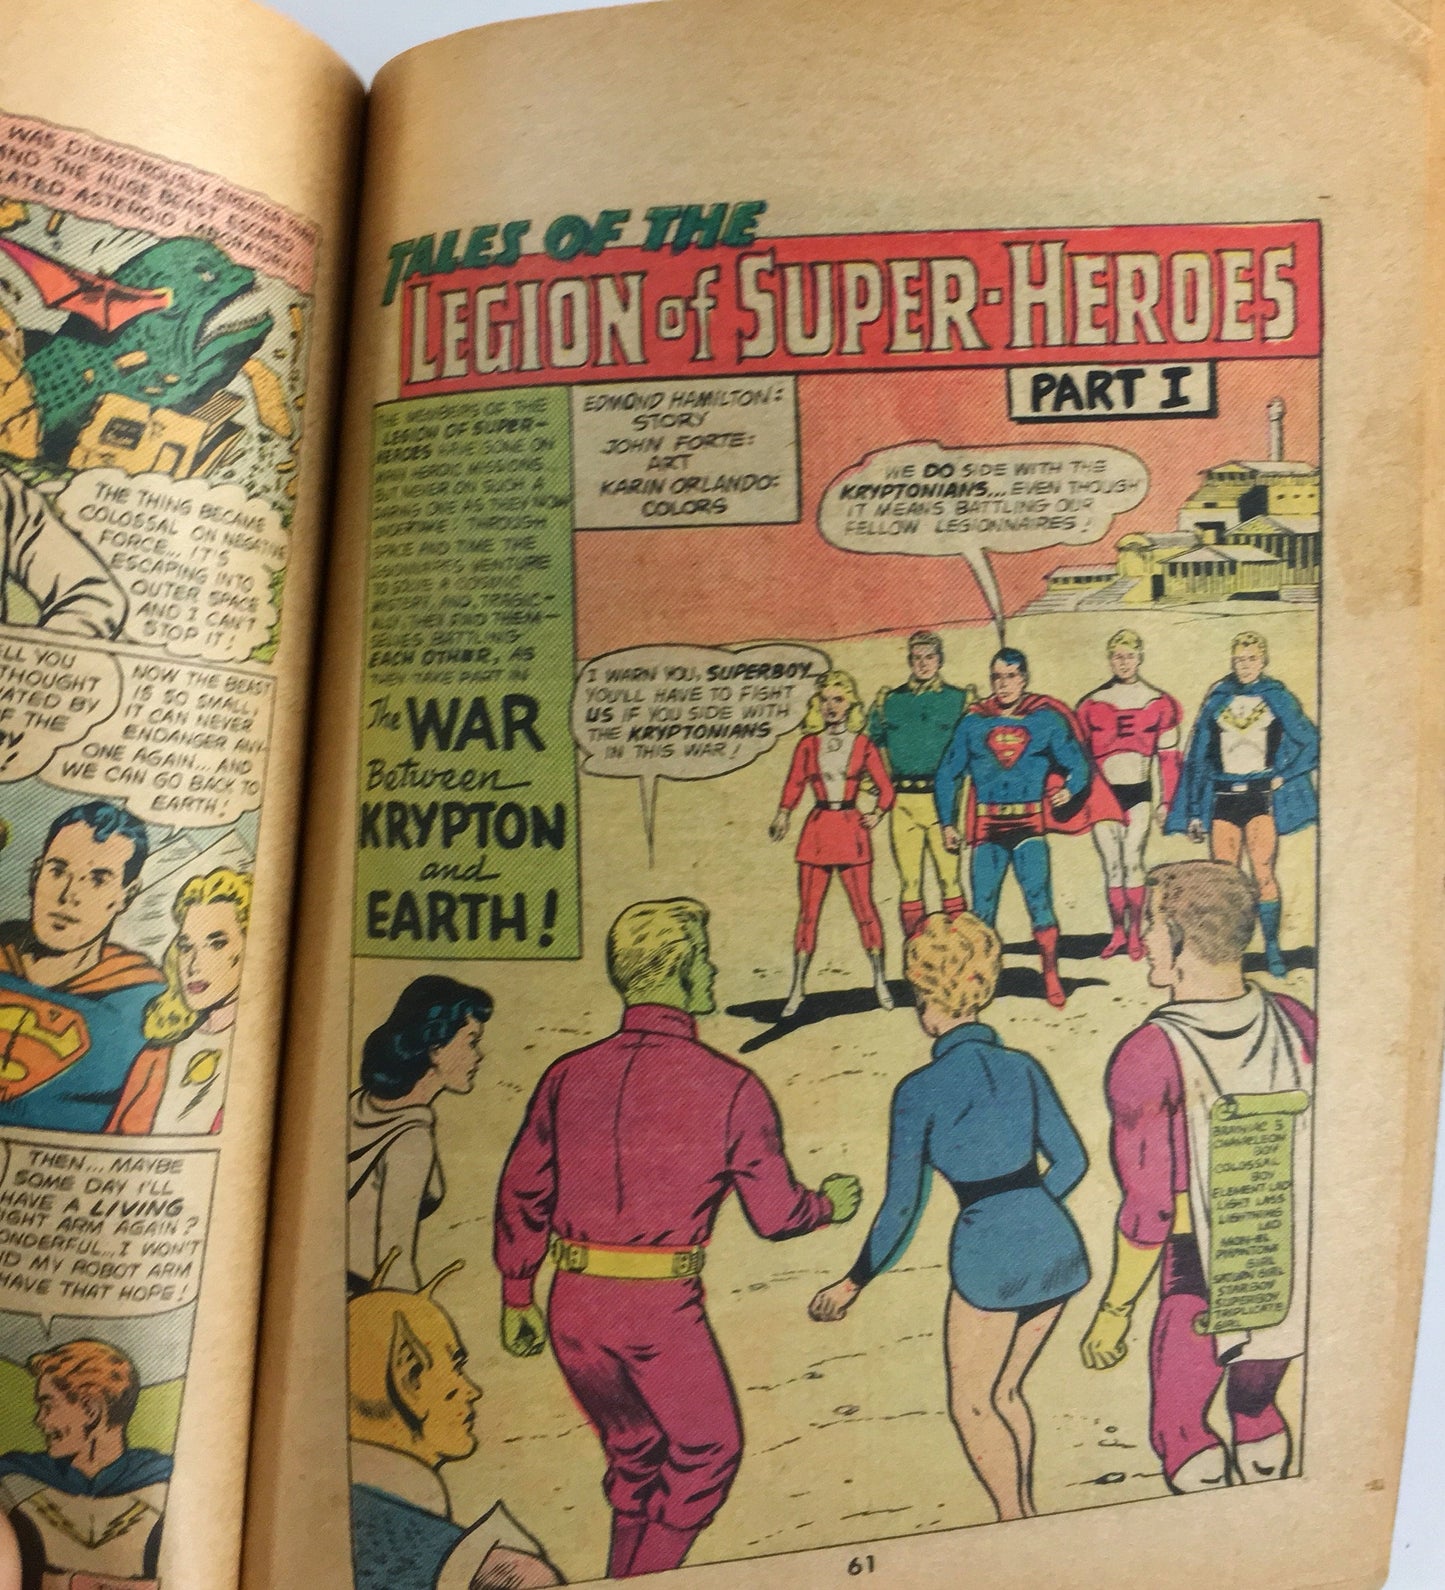 DC Blue Ribbon Digest Legion Of Super-Heroes #64 featuring Superboy, the Moby Dick of Space! Vintage comic book circa 1985